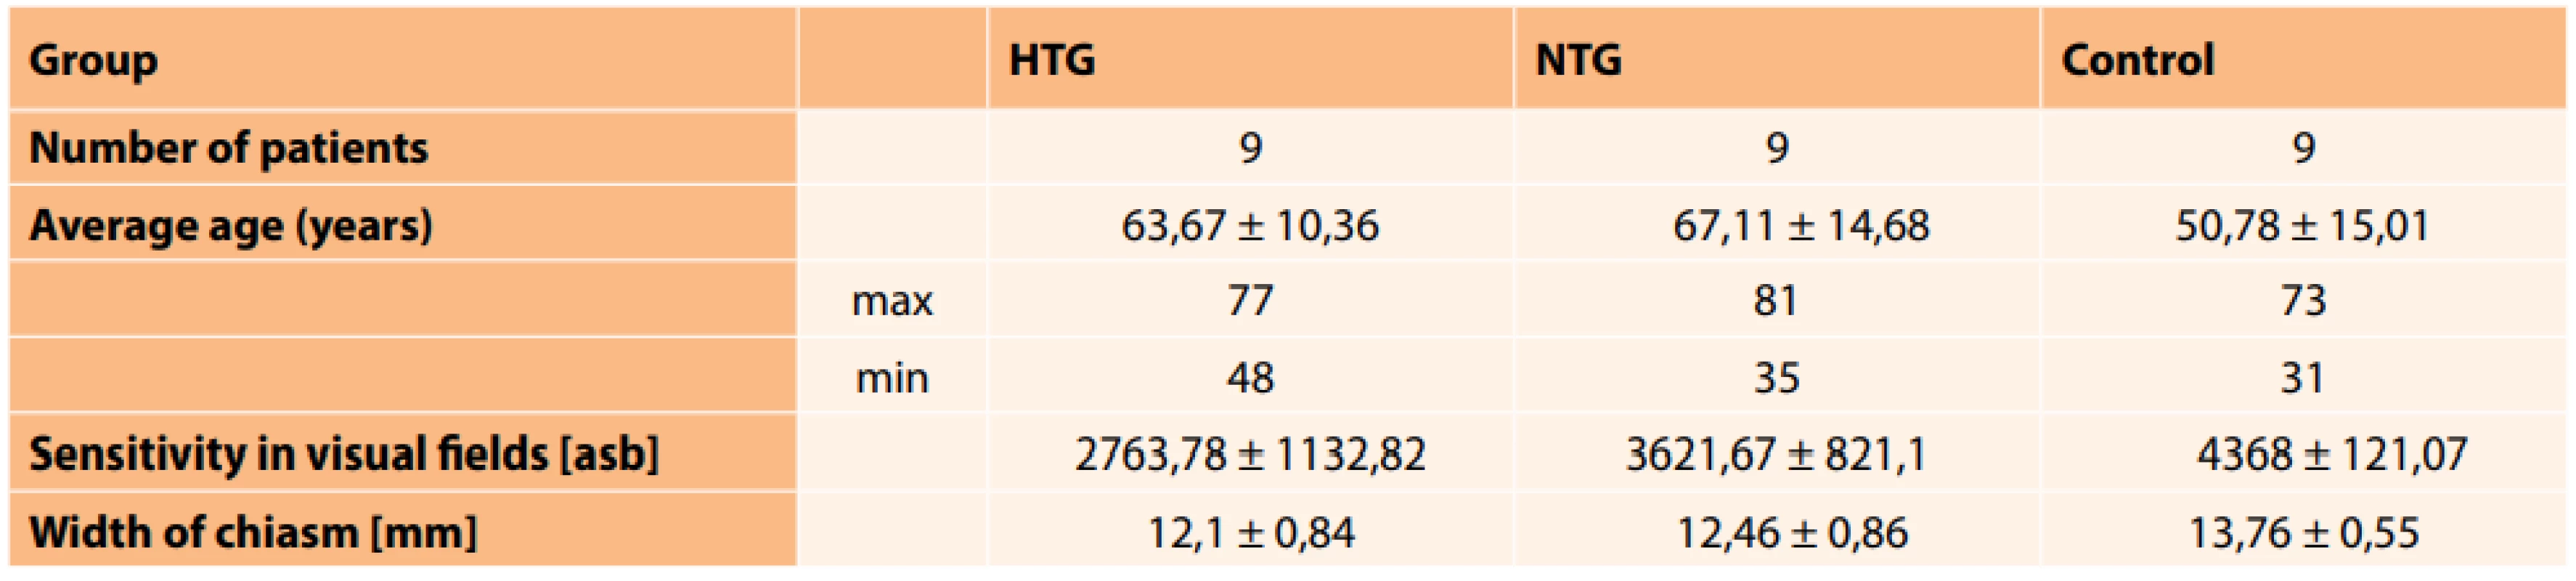 Measured mean values and their standard deviations in patients with HTG, NTG and control group 